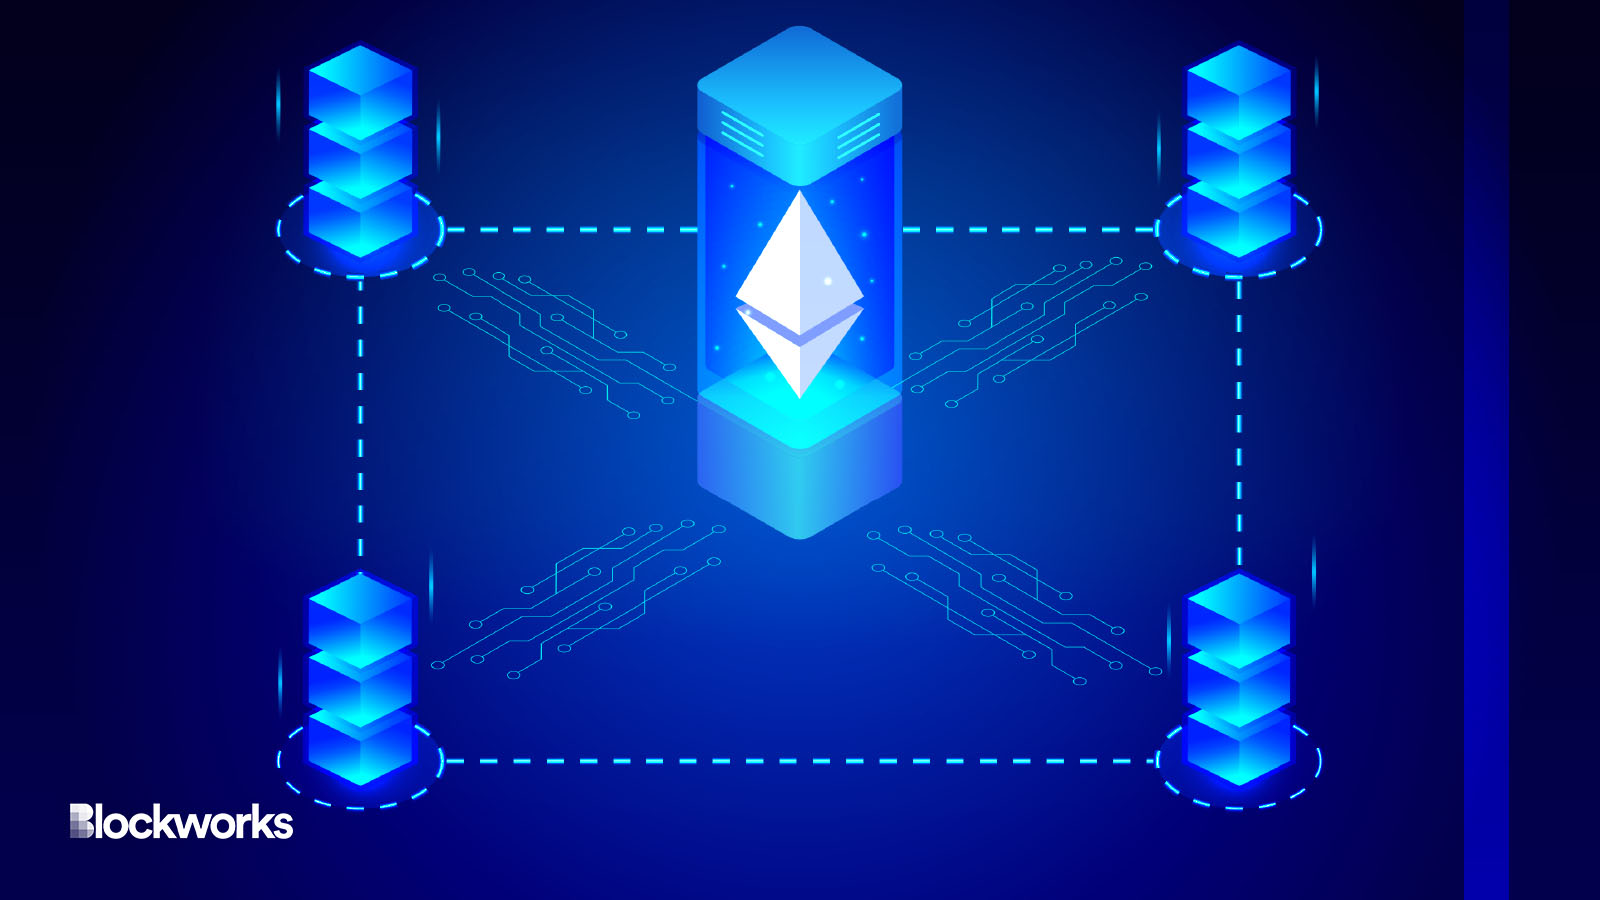 How to stake Ethereum? - Cointribune